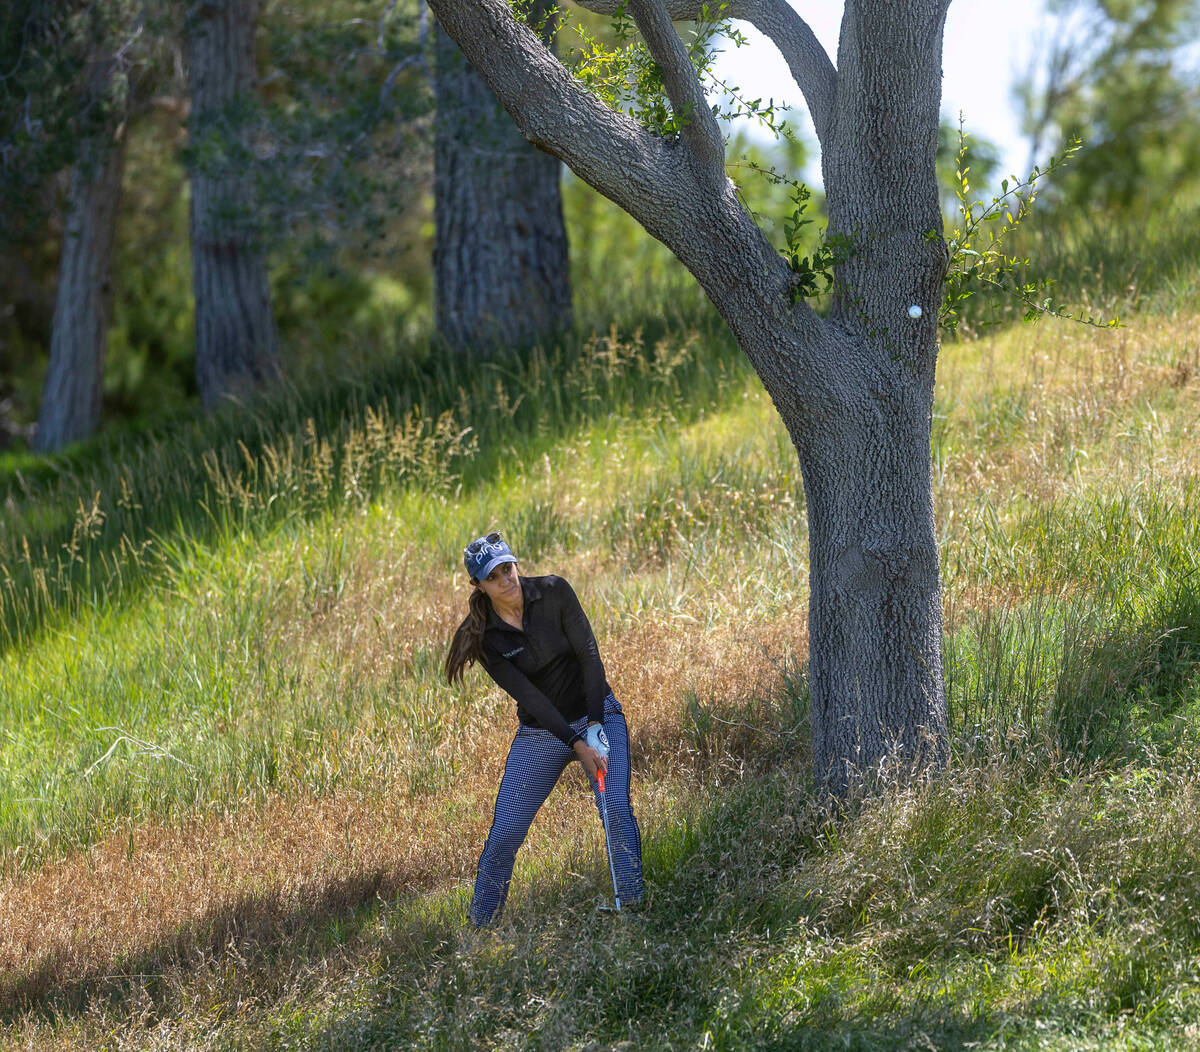 Paula Reto digs out of the grass on hole 7 during the third day of Bank of Hope LPGA Match Play ...